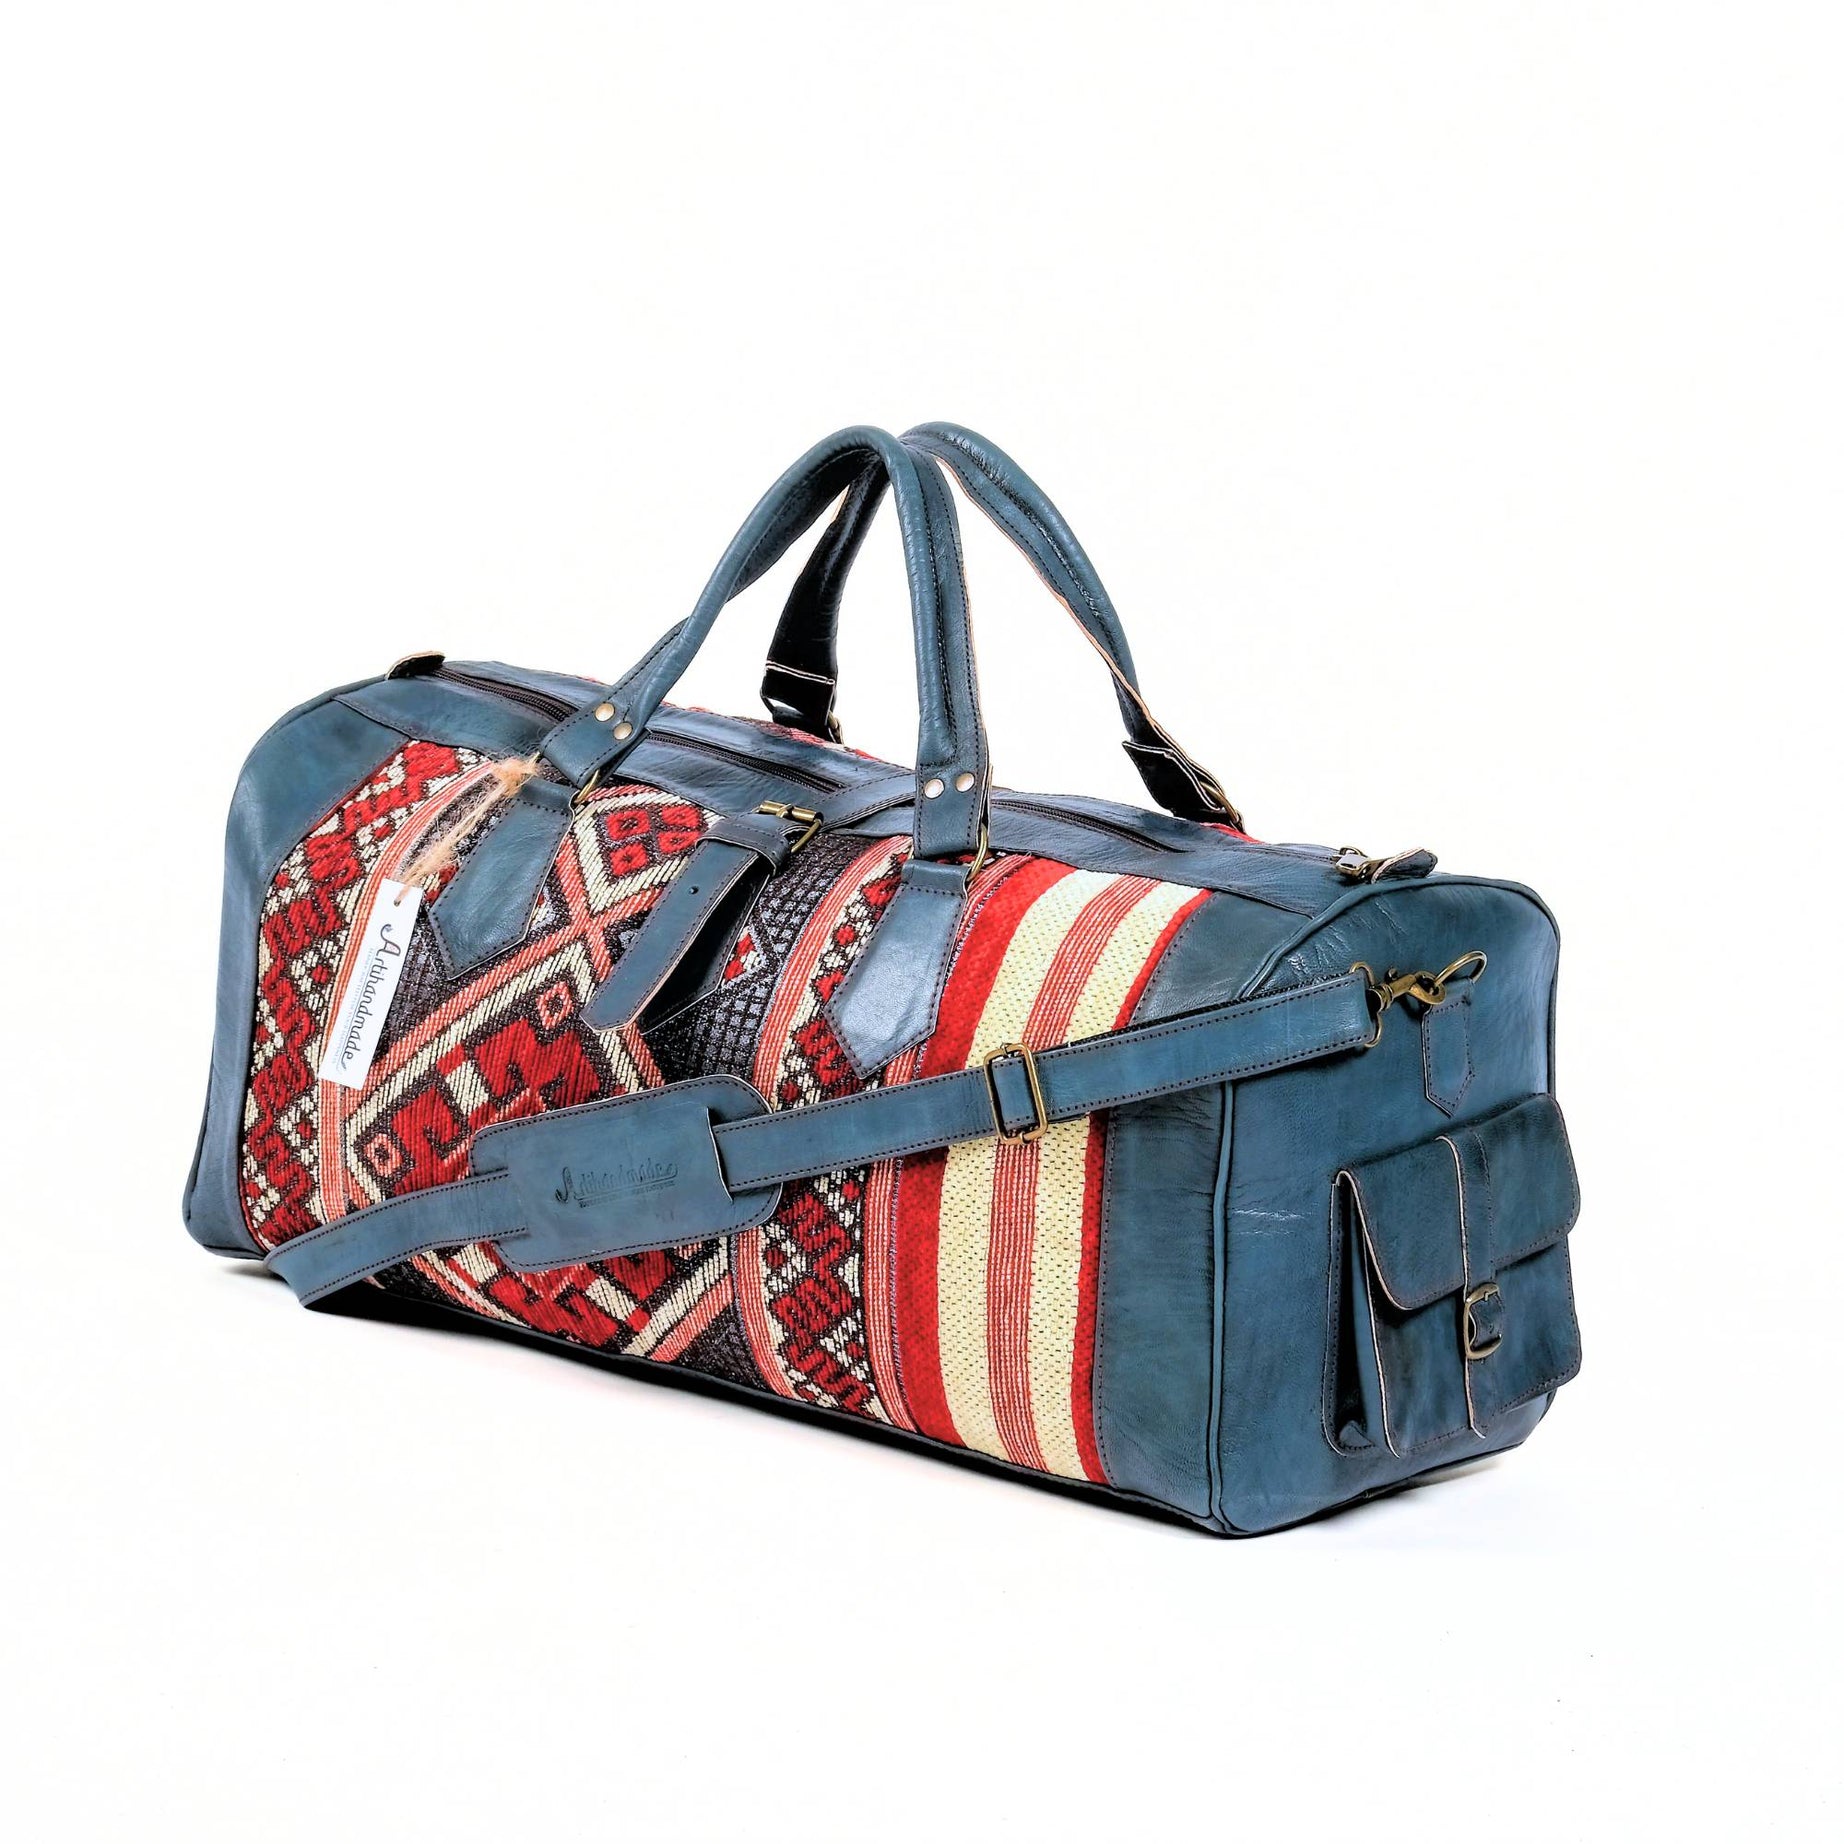 Handcrafted Leather Kilim Duffle Bag - Blue